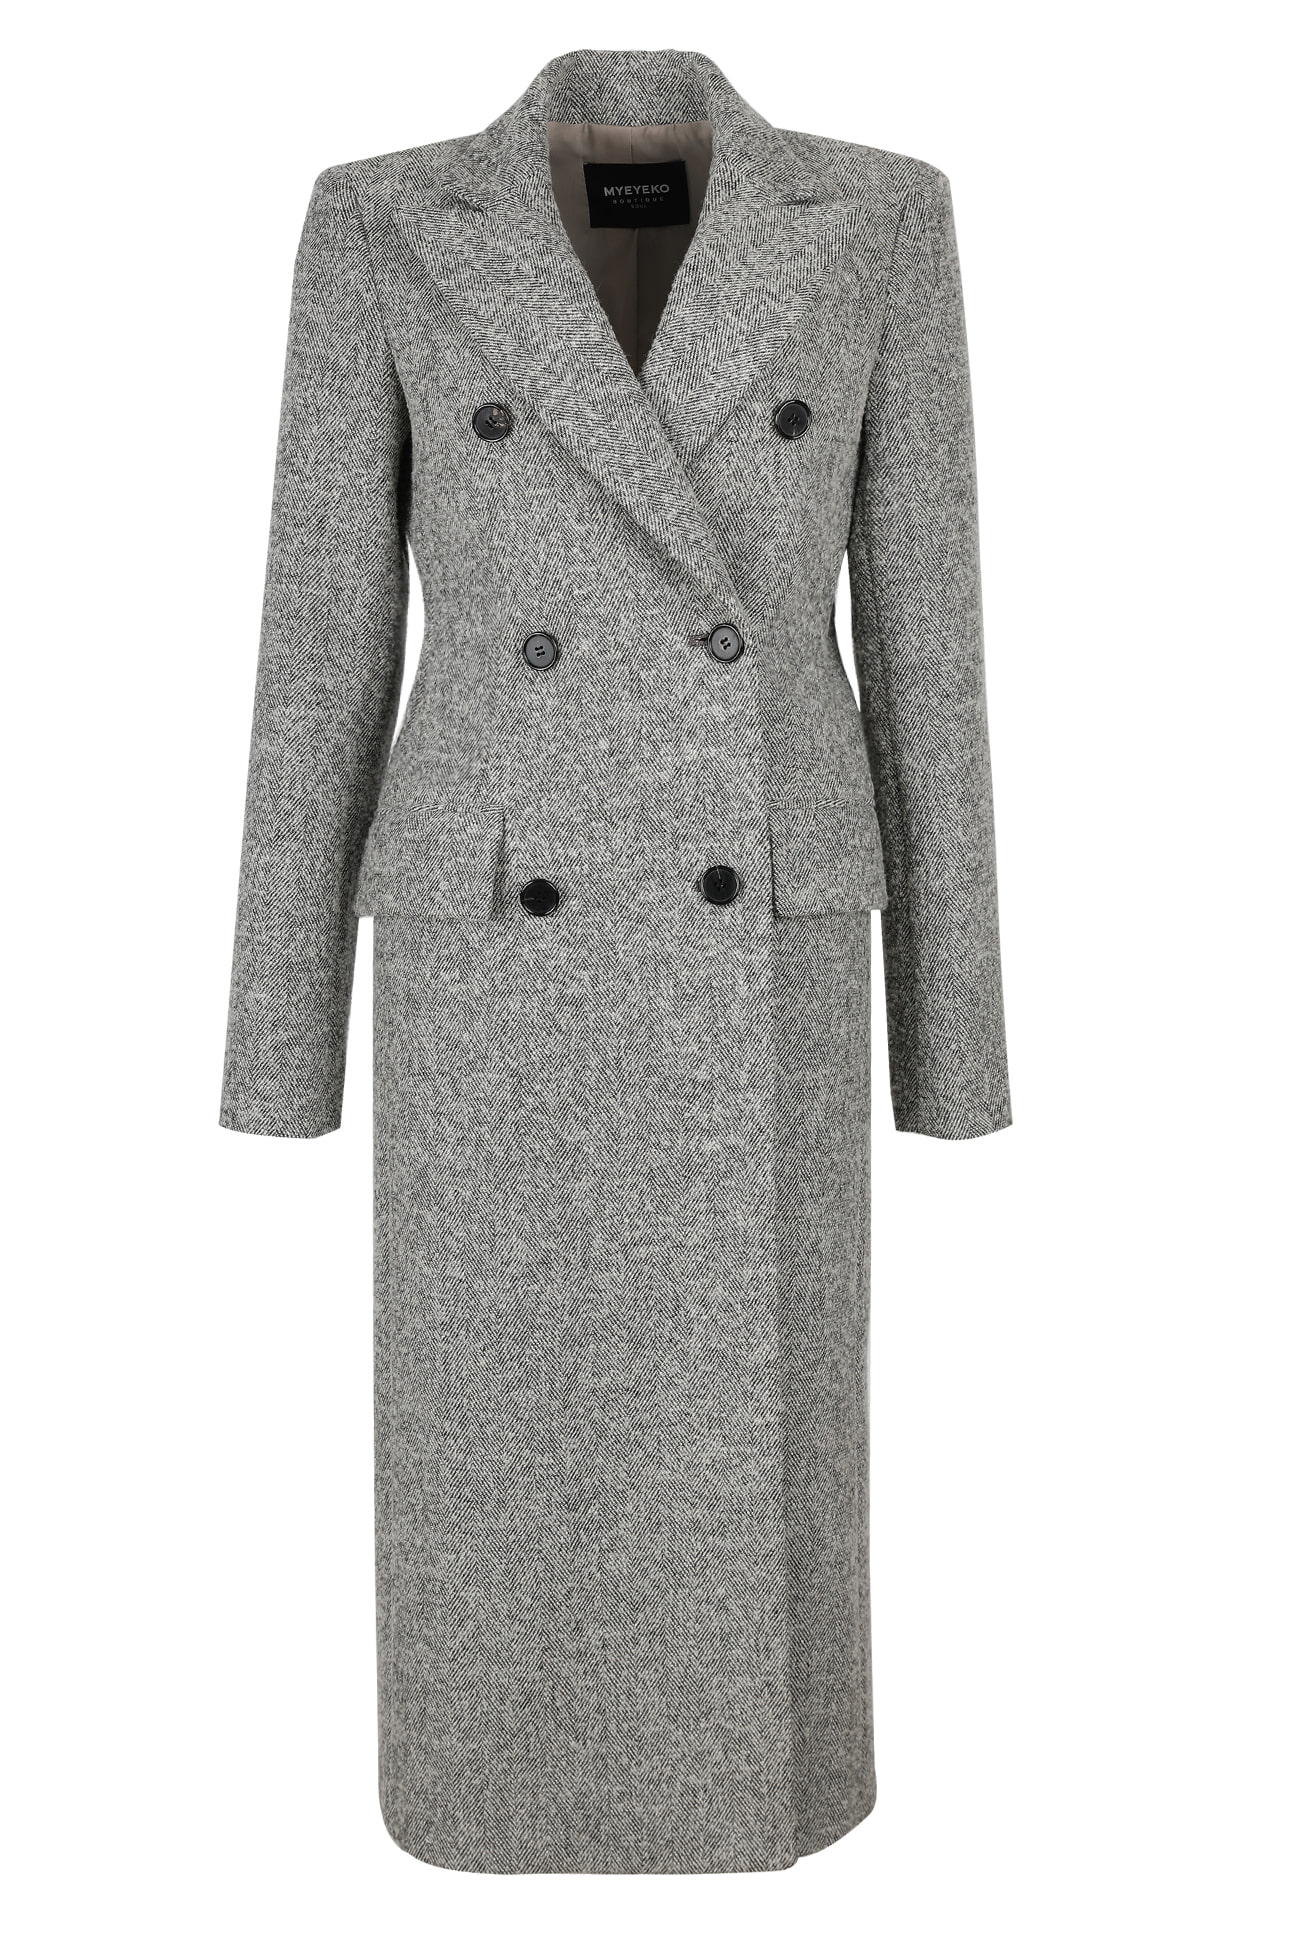 HIGH QUALITY LINE - Tailored Wool Coat (HerringBone) Fabric by. Made in JAPAN